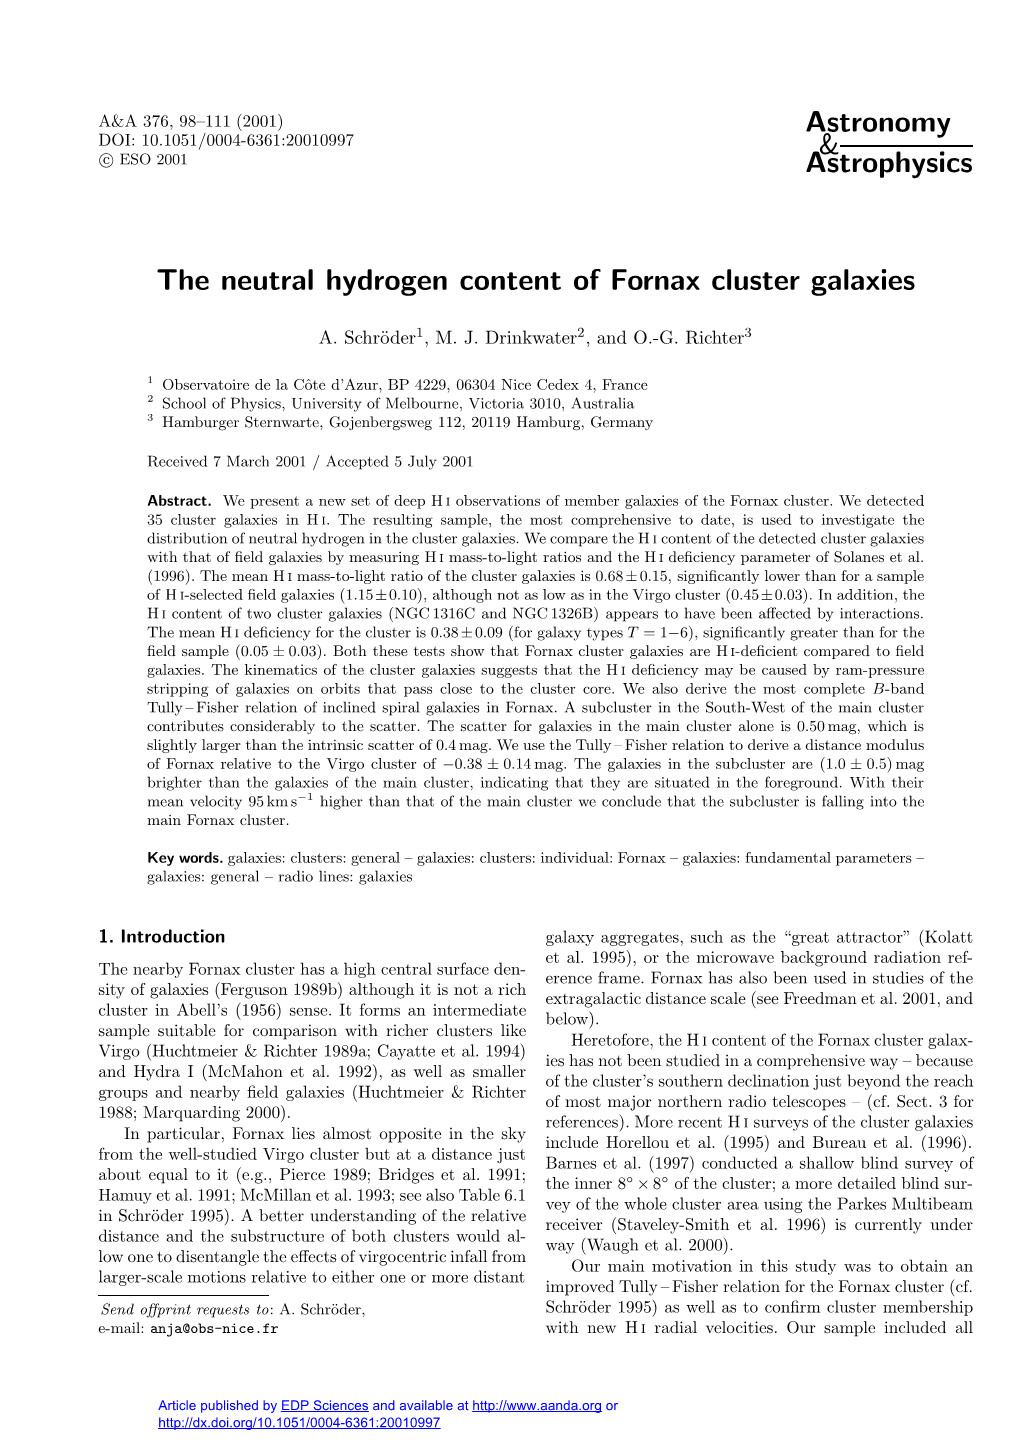 The Neutral Hydrogen Content of Fornax Cluster Galaxies